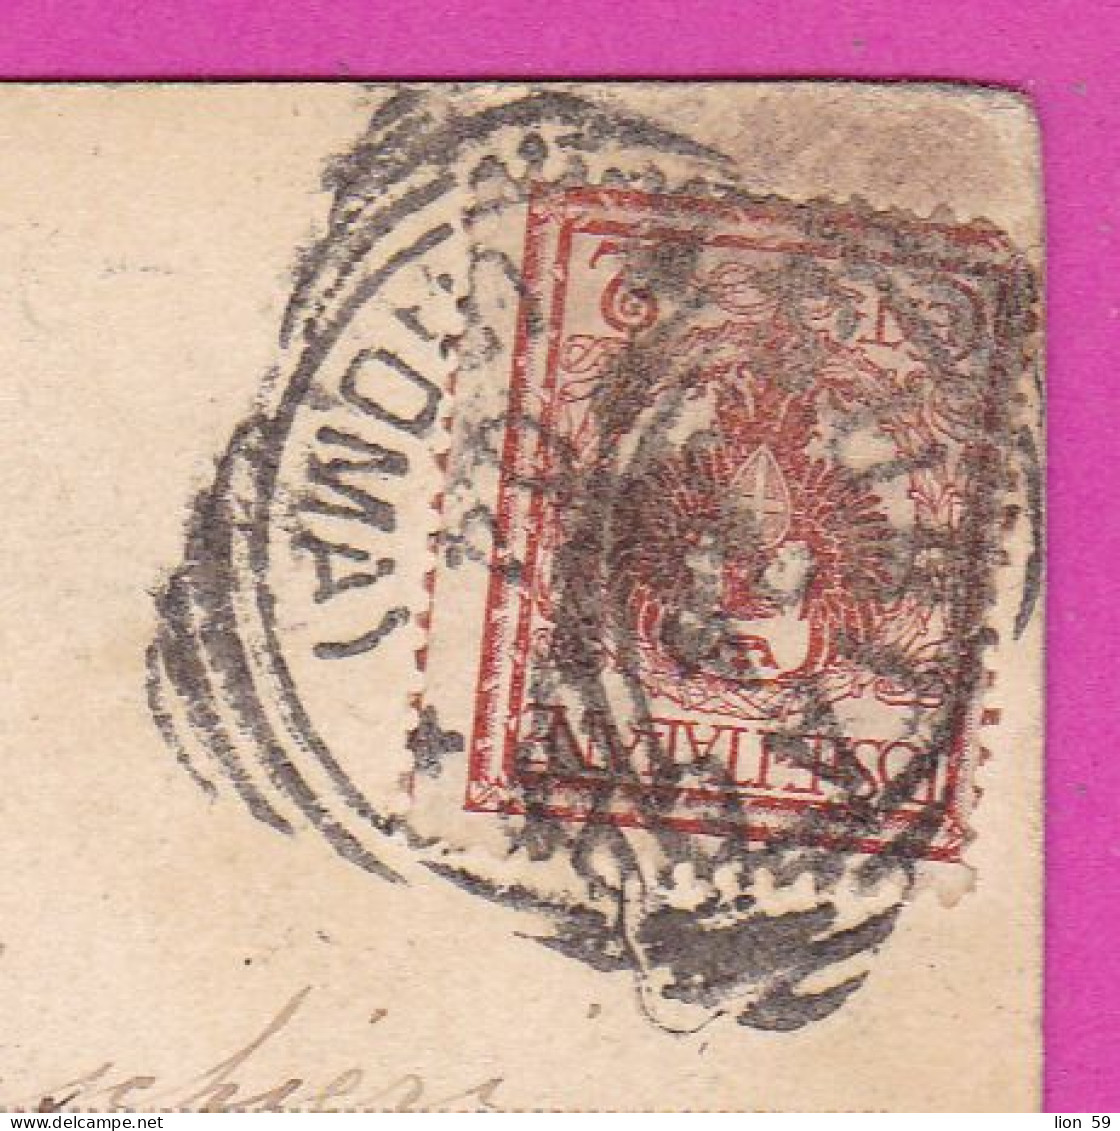 294074 / Italy - SUBIACO Interno Del 3 Chiostro ( XII Secolo)  PC 1904 USED - 2 Cent Eagle With Coat Of Arms - Marcofilía